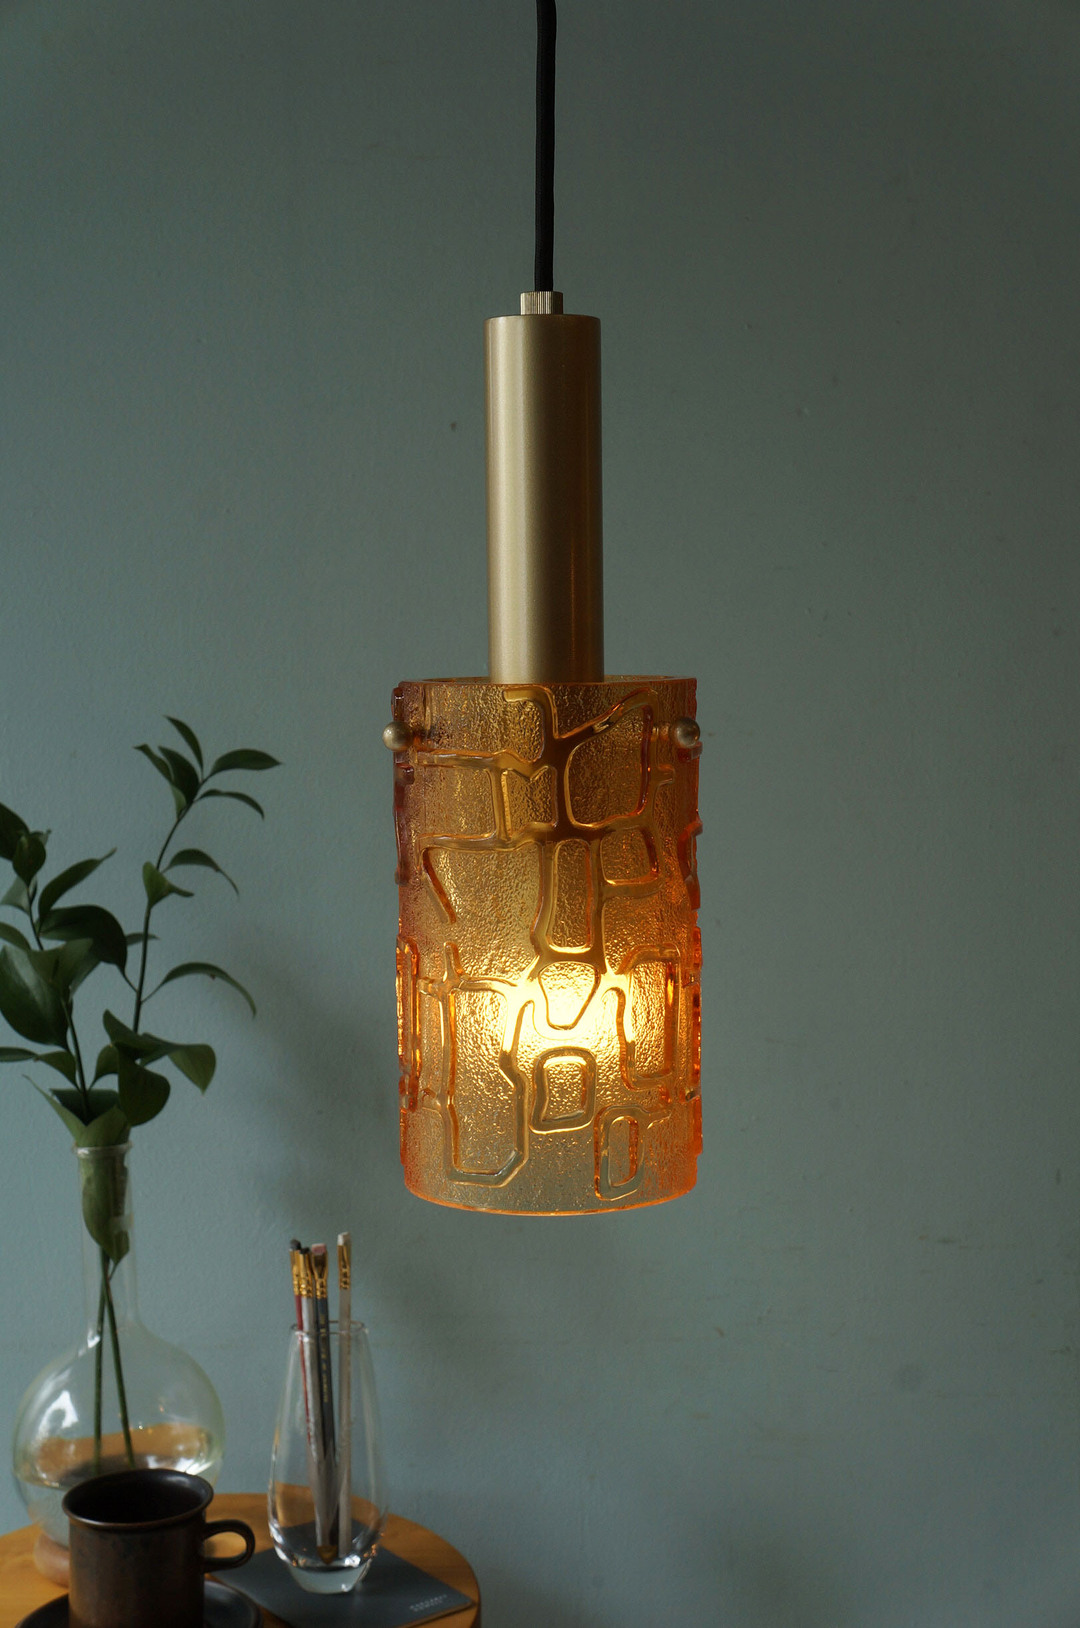 Scandinavian Vintage Style Amber Glass Pendant Light/アンバーガラス ペンダントライト 北欧モダン 照明 レトロ ヴィンテージスタイル